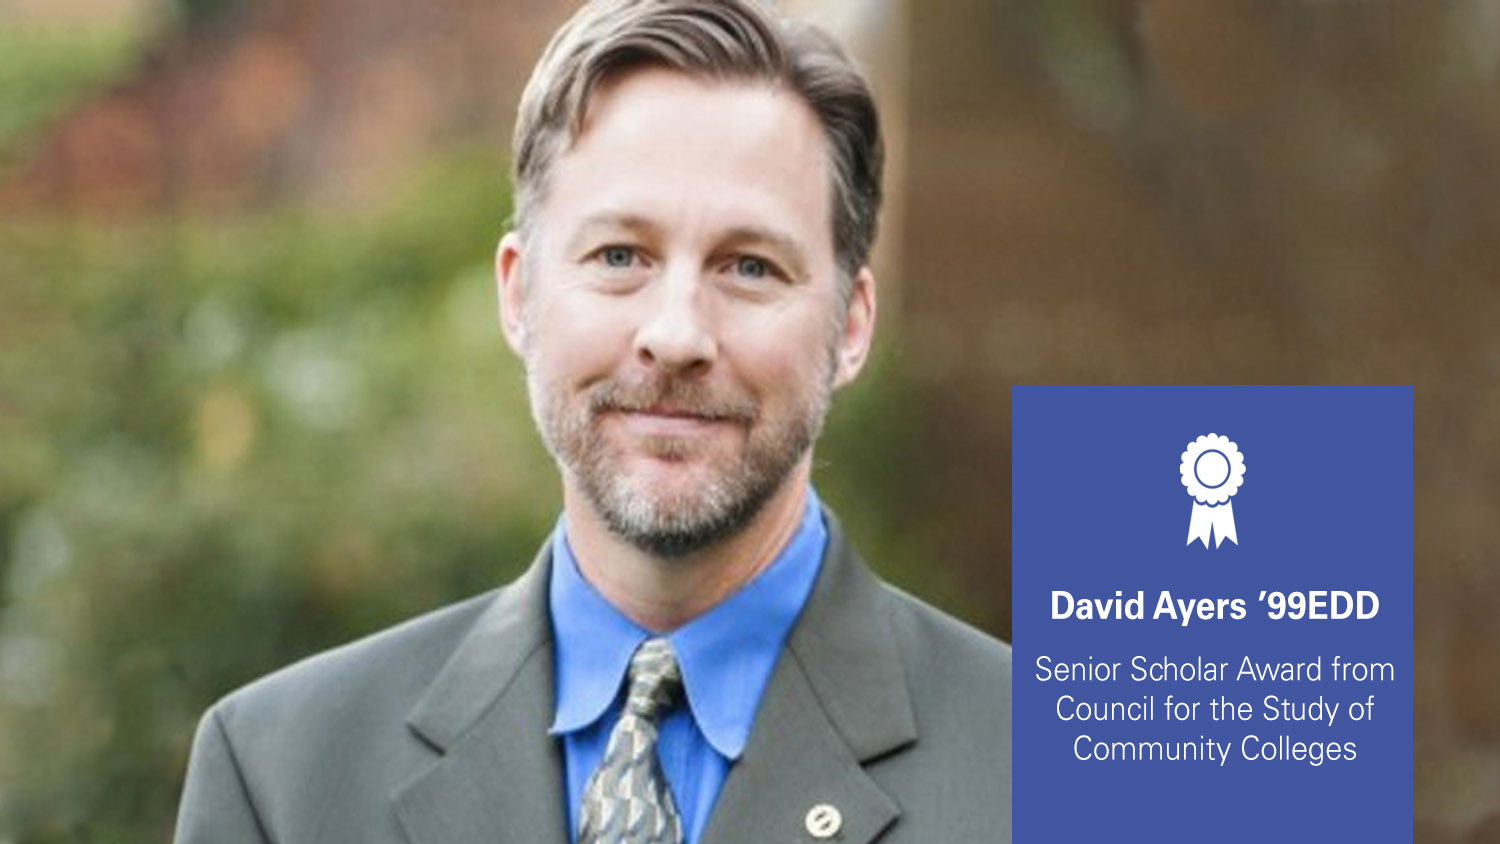 David Ayers won the Senior Scholar Award from Council for the Study of Community Colleges